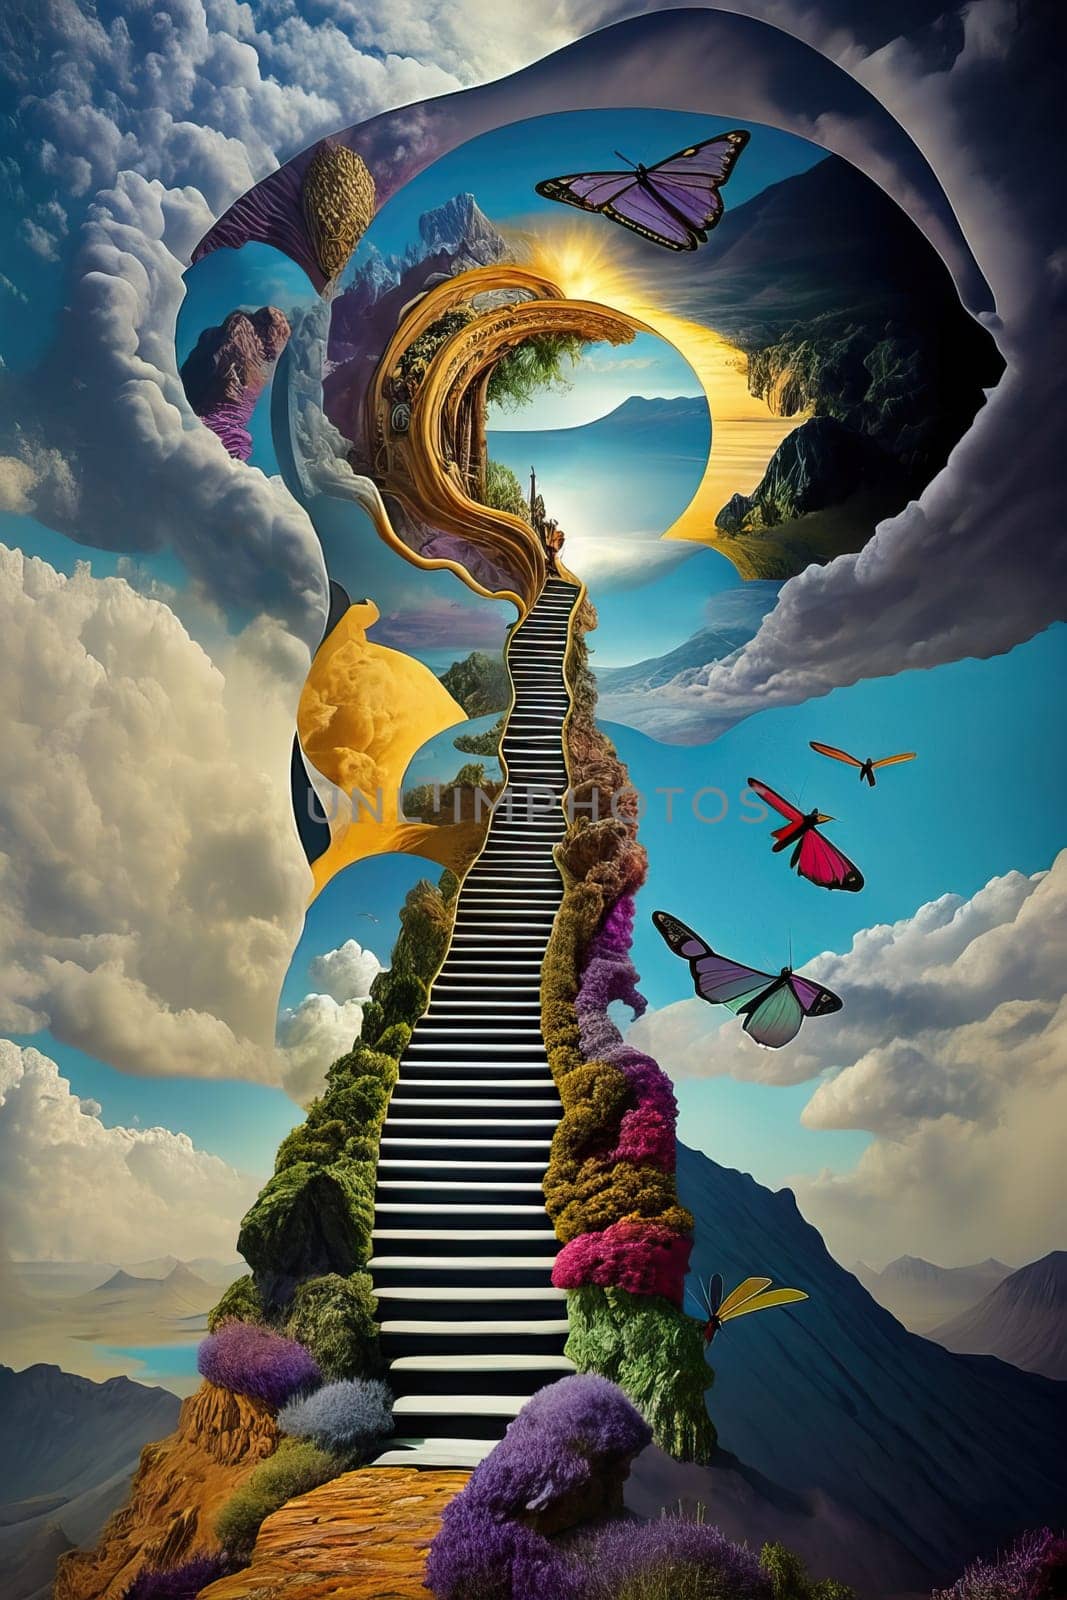 Inspiratioin of stairway to heaven by applesstock